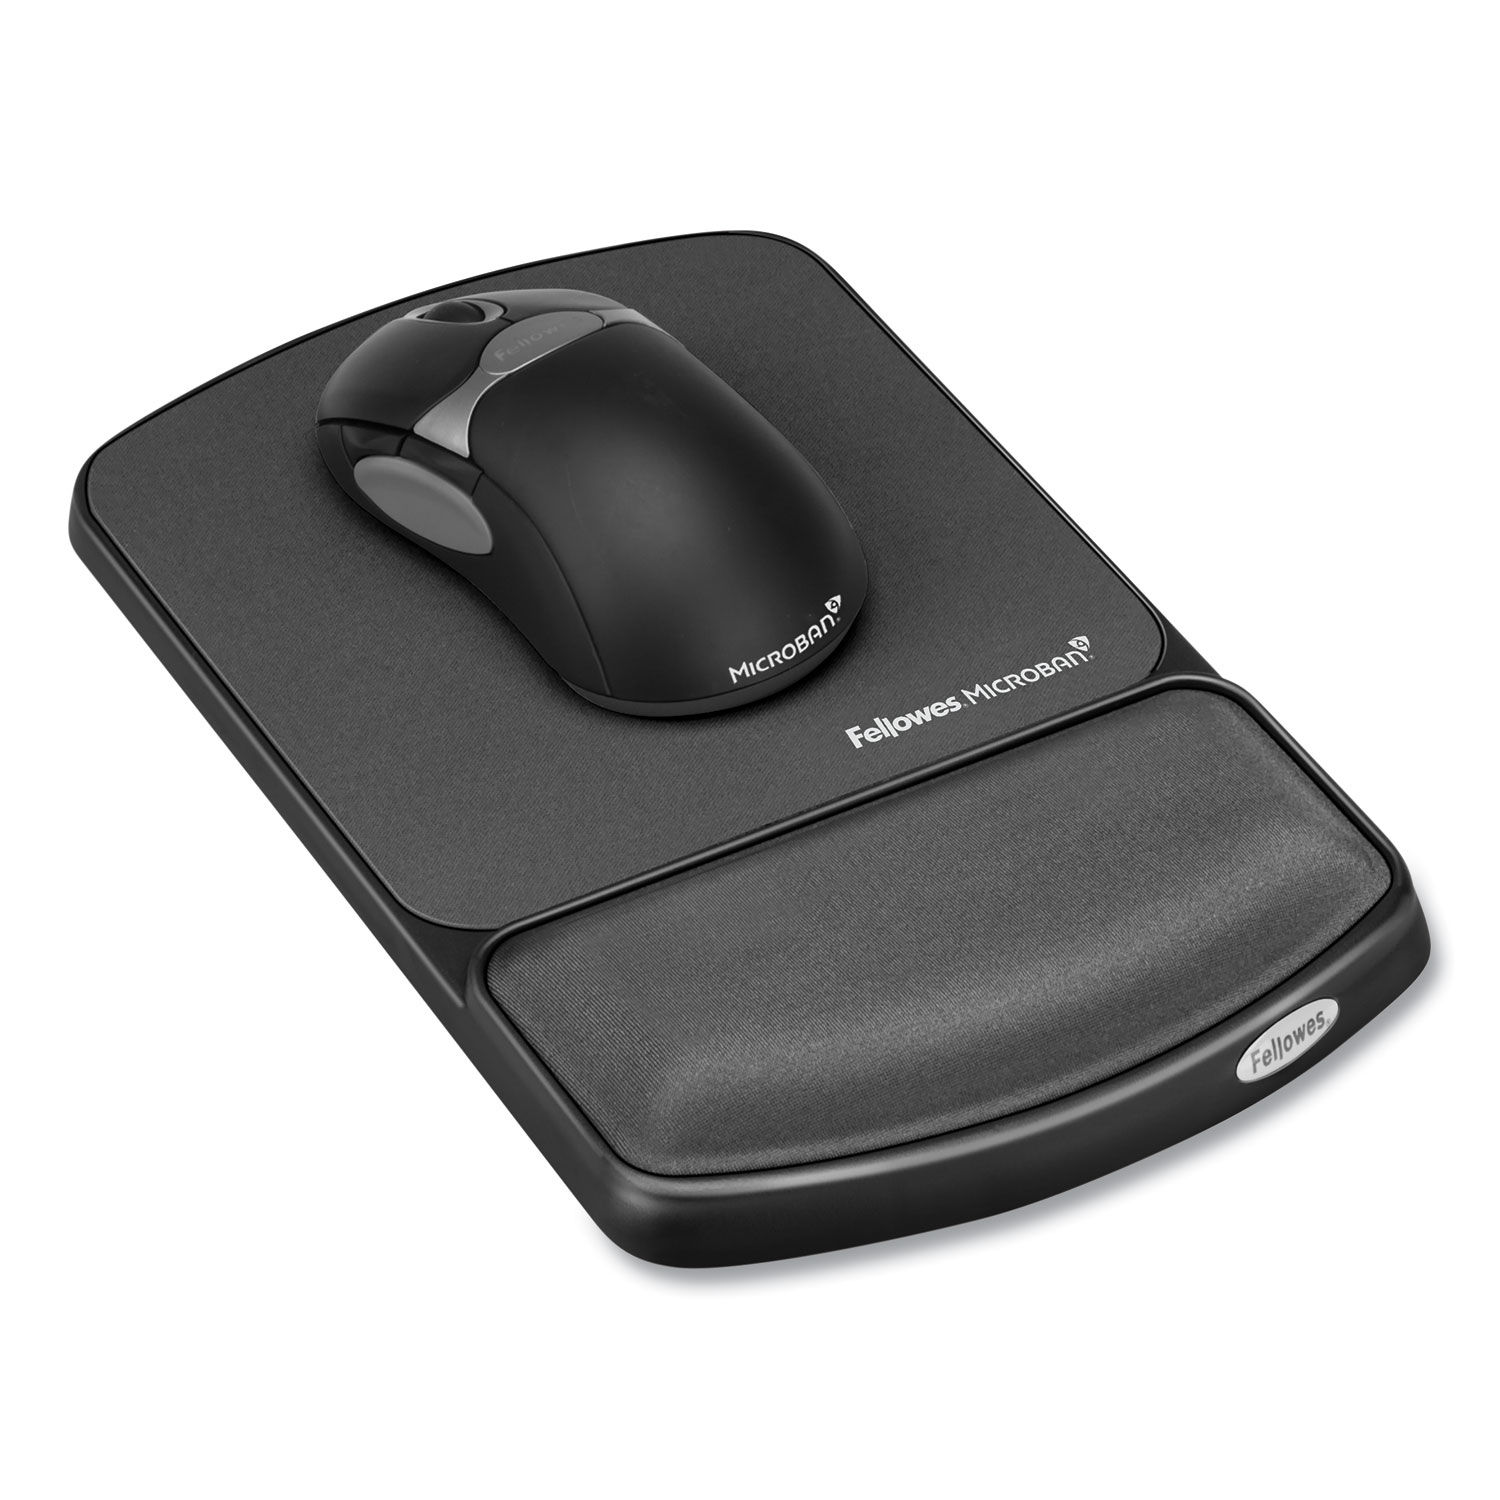 Mouse Pad with Wrist Support with Microban Protection by Fellowes®  FEL9175101 